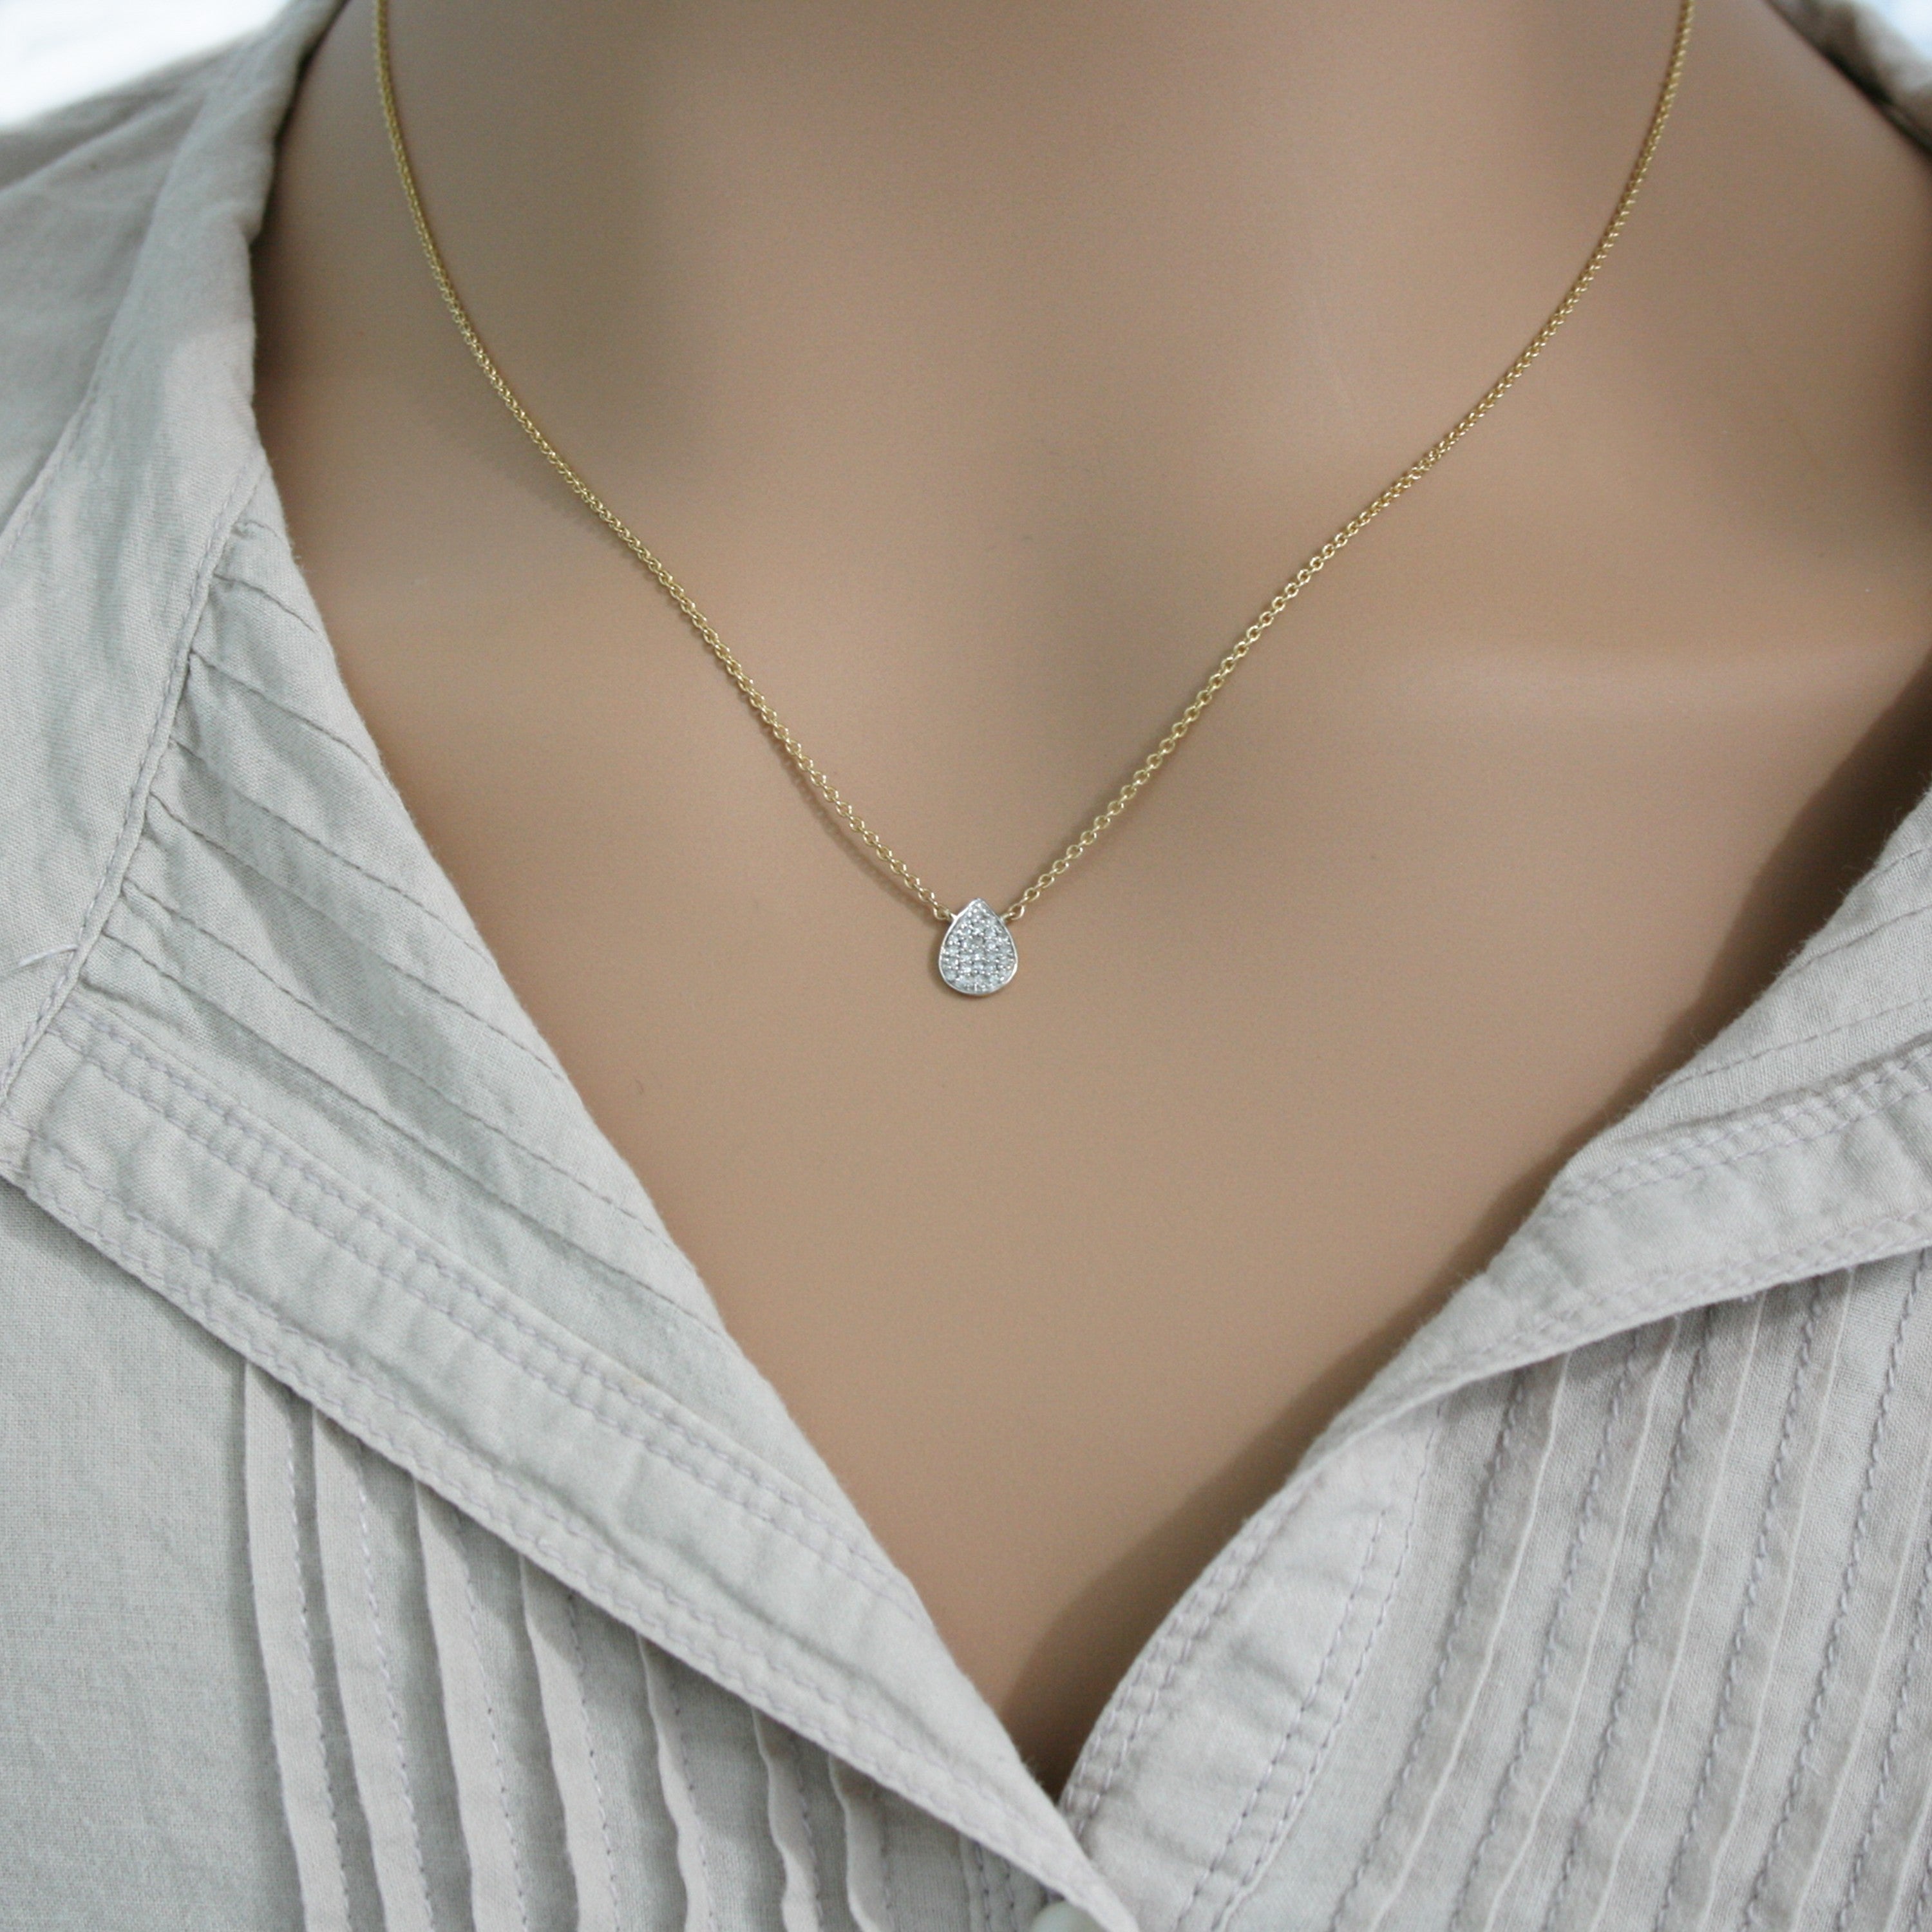 9ct Gold 45cm Pear Shaped Diamond Necklace